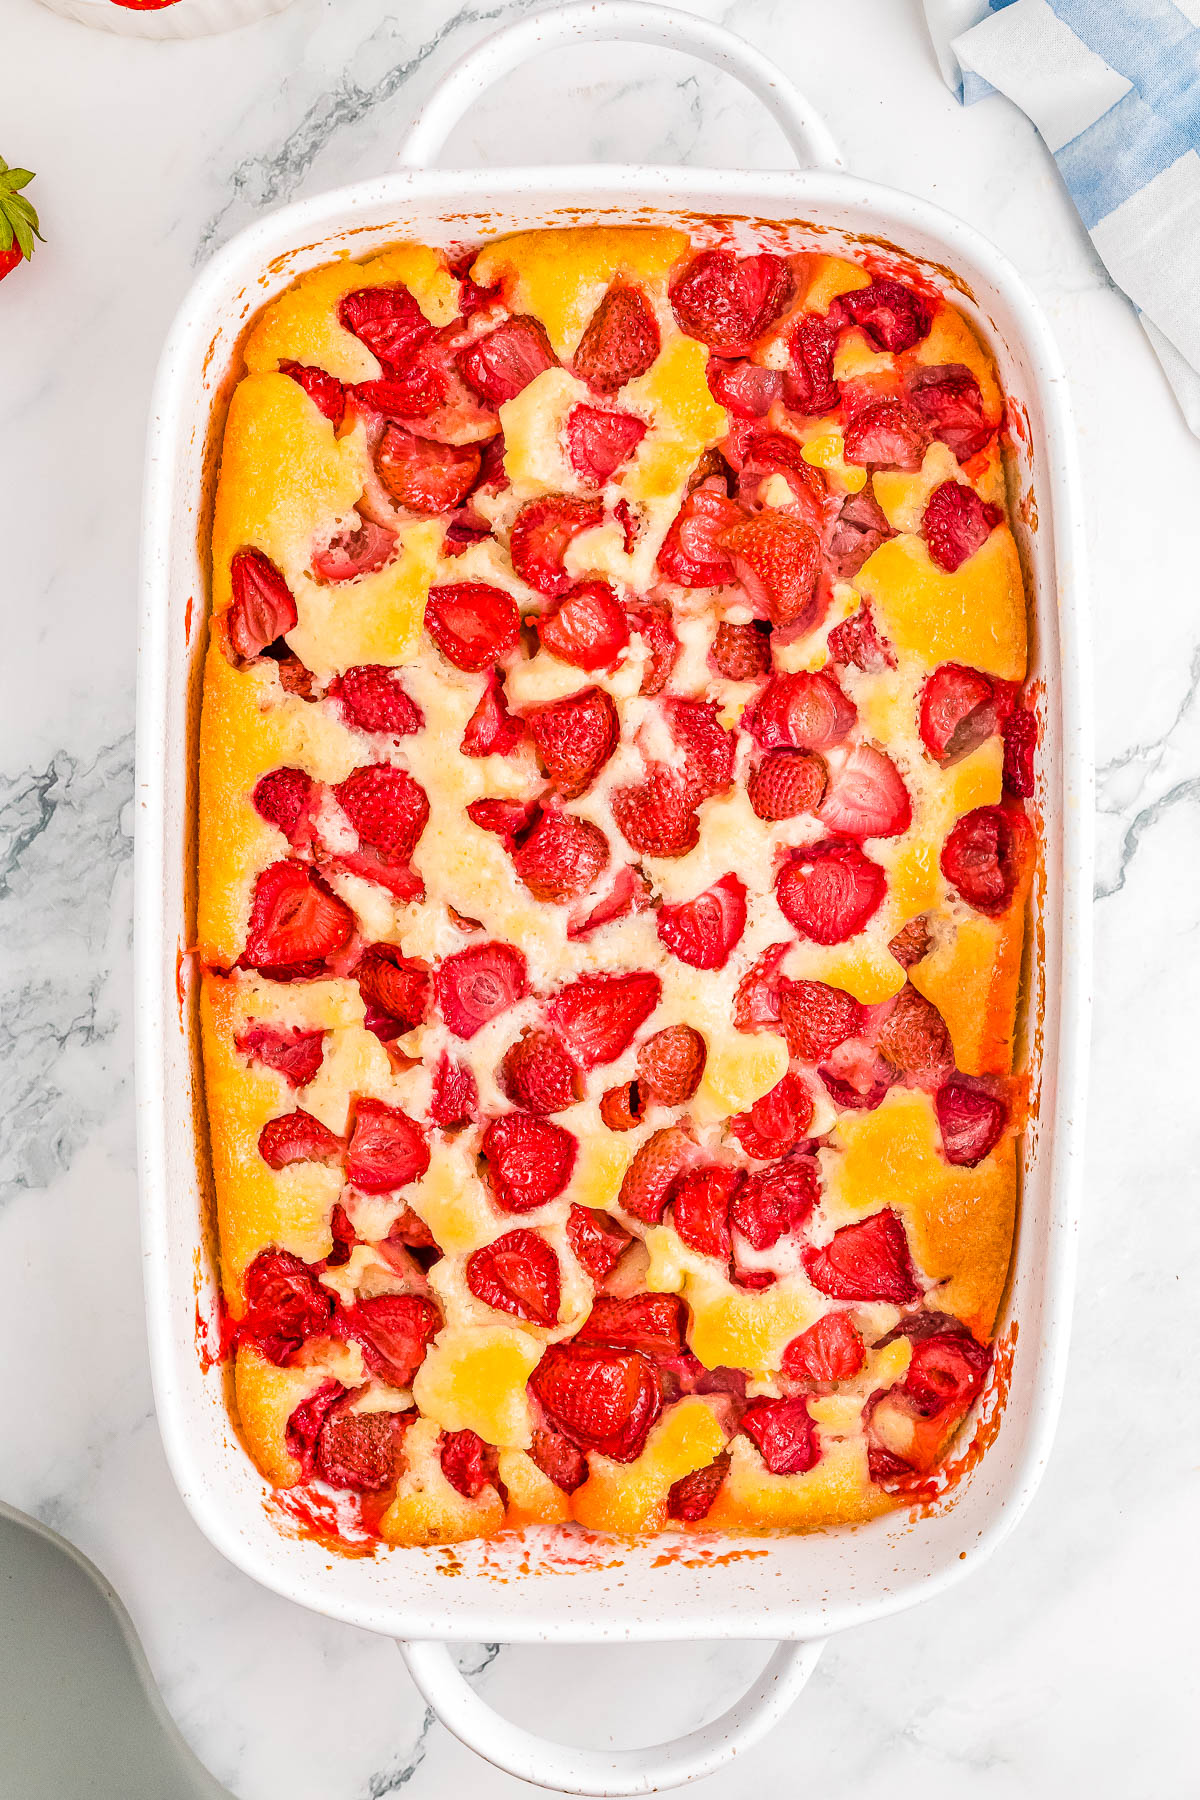 Baked dessert in a white dish with sliced peaches and strawberries on a marble surface.